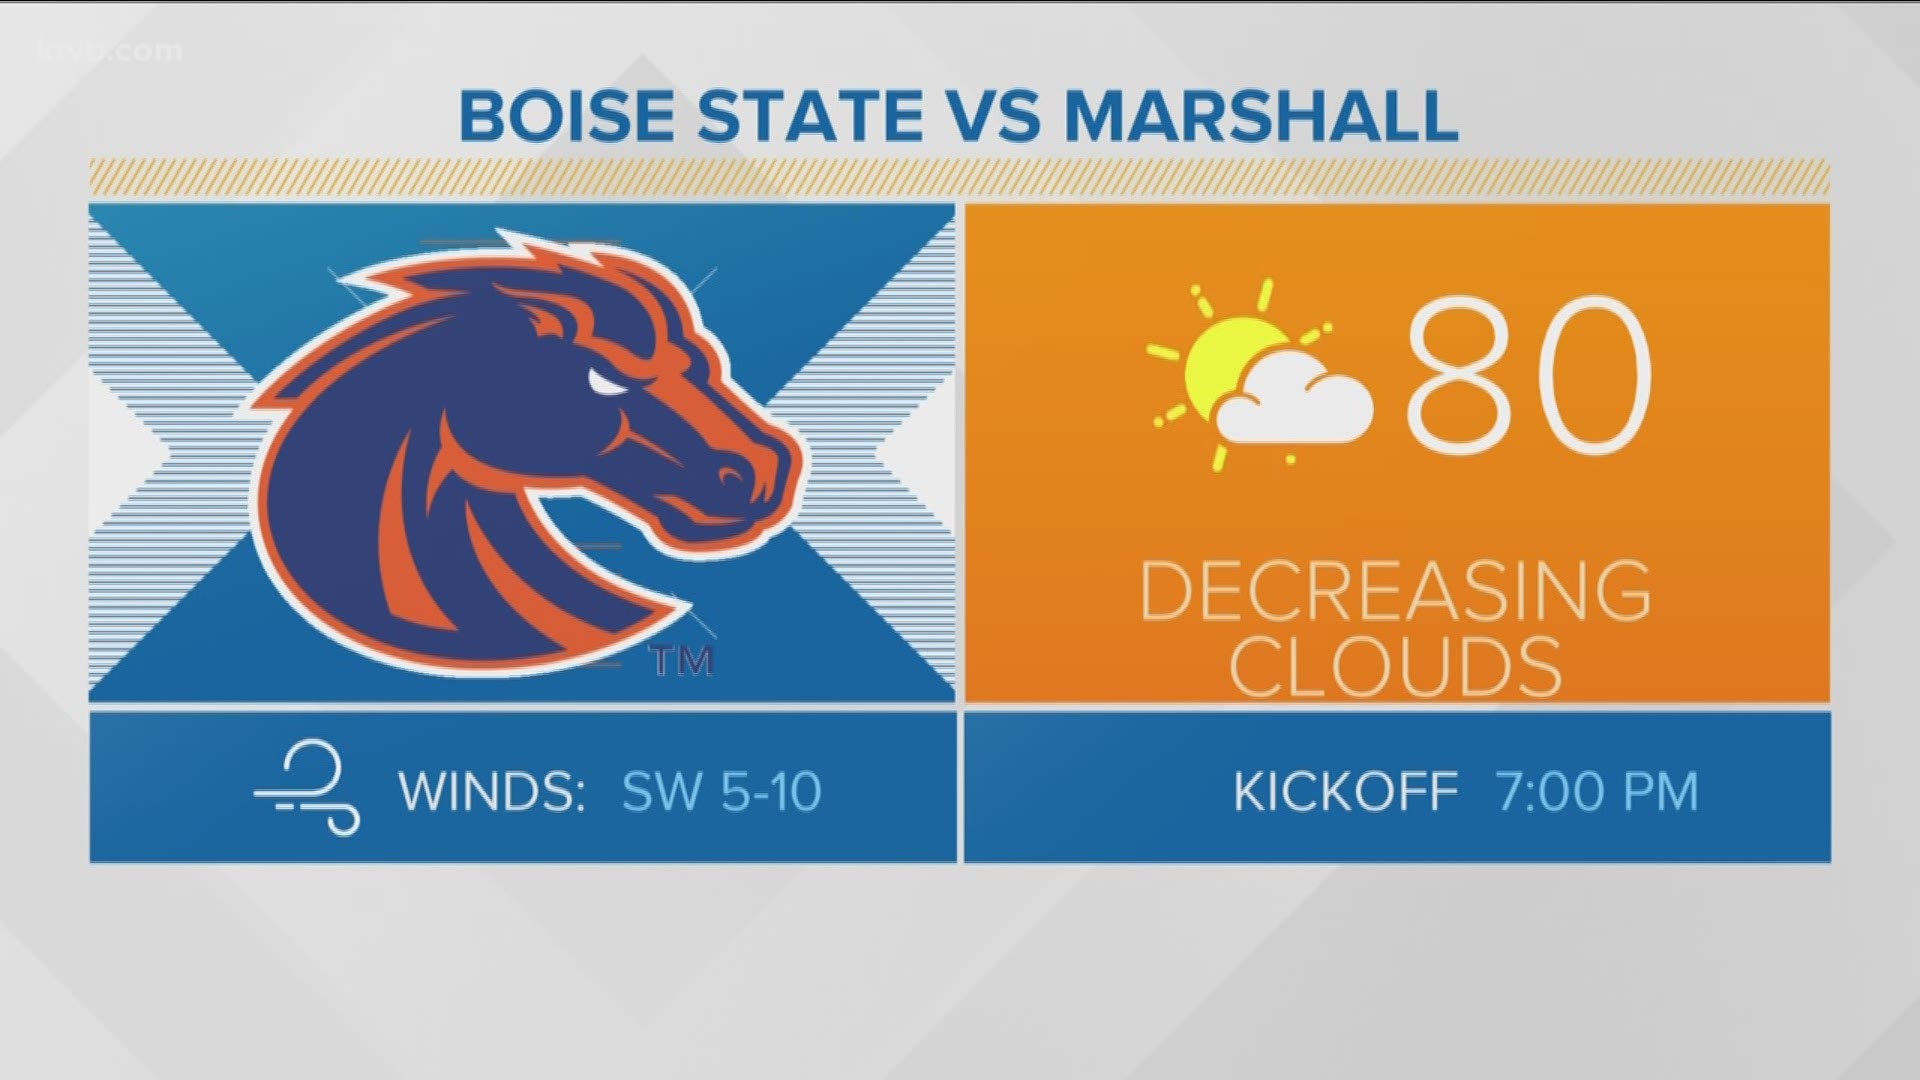 Gameday temperatures will be around 80 degrees with decreasing clouds.